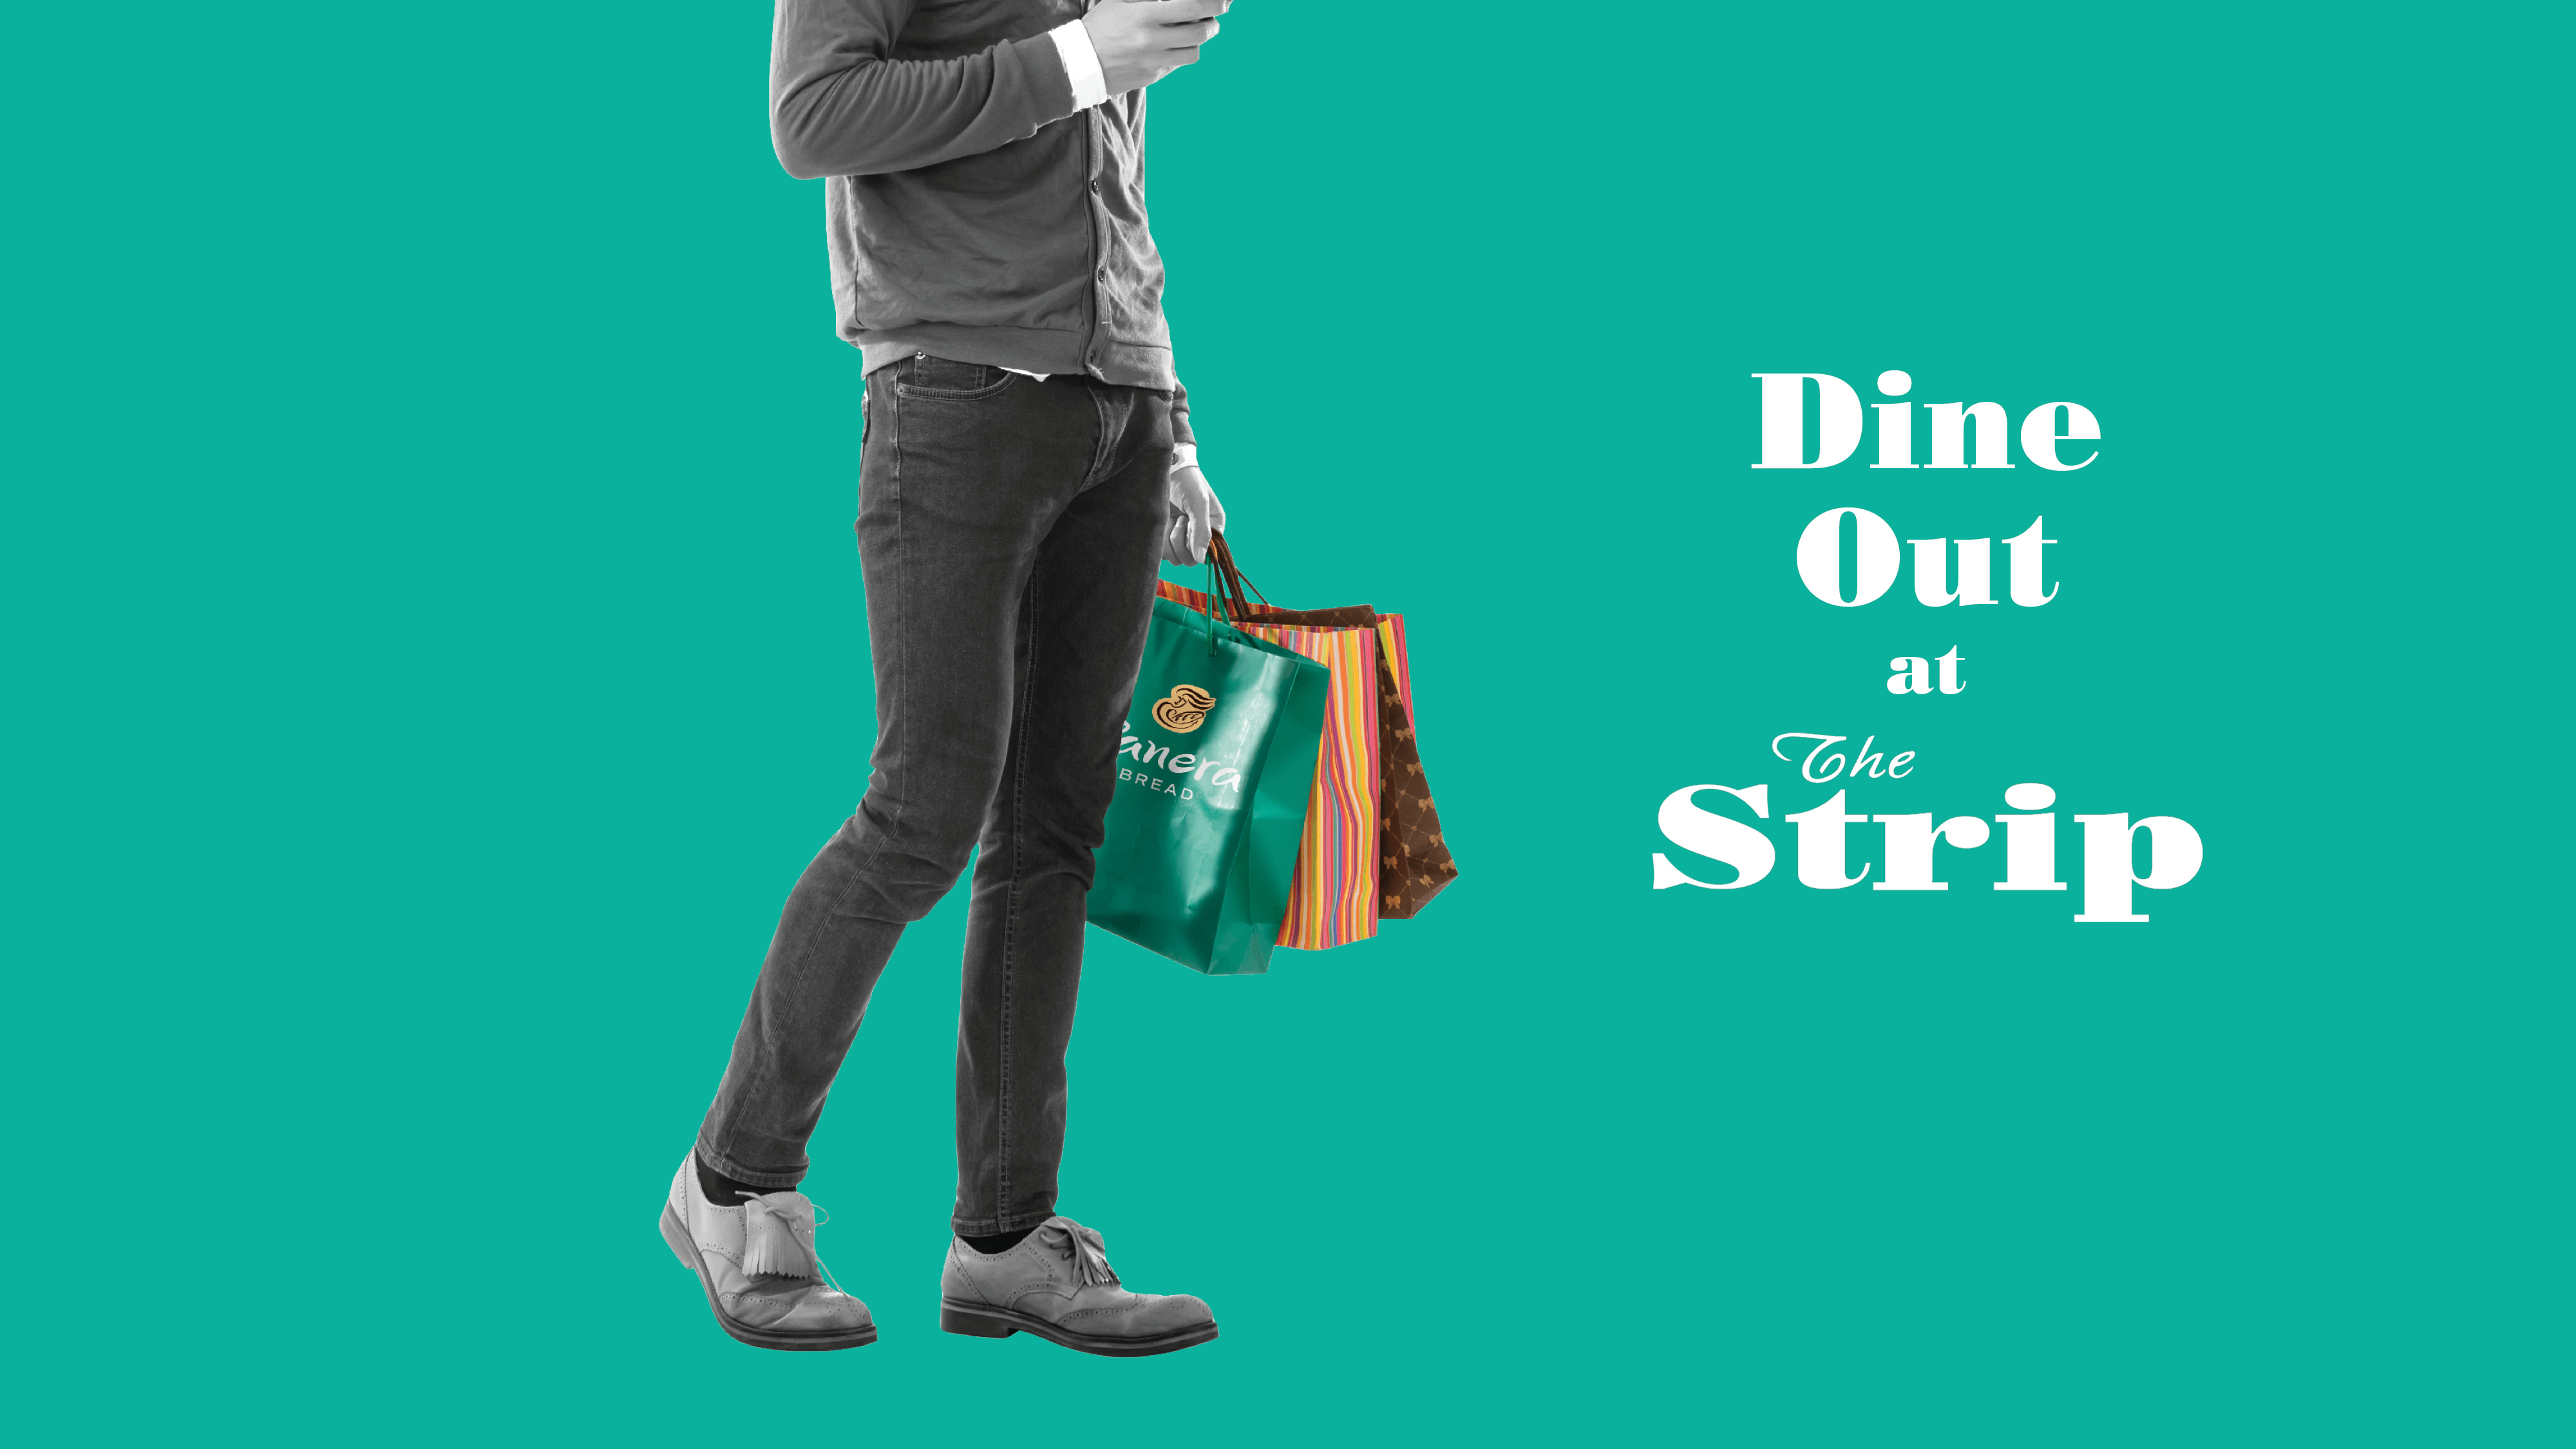 Dine Out at The Strip